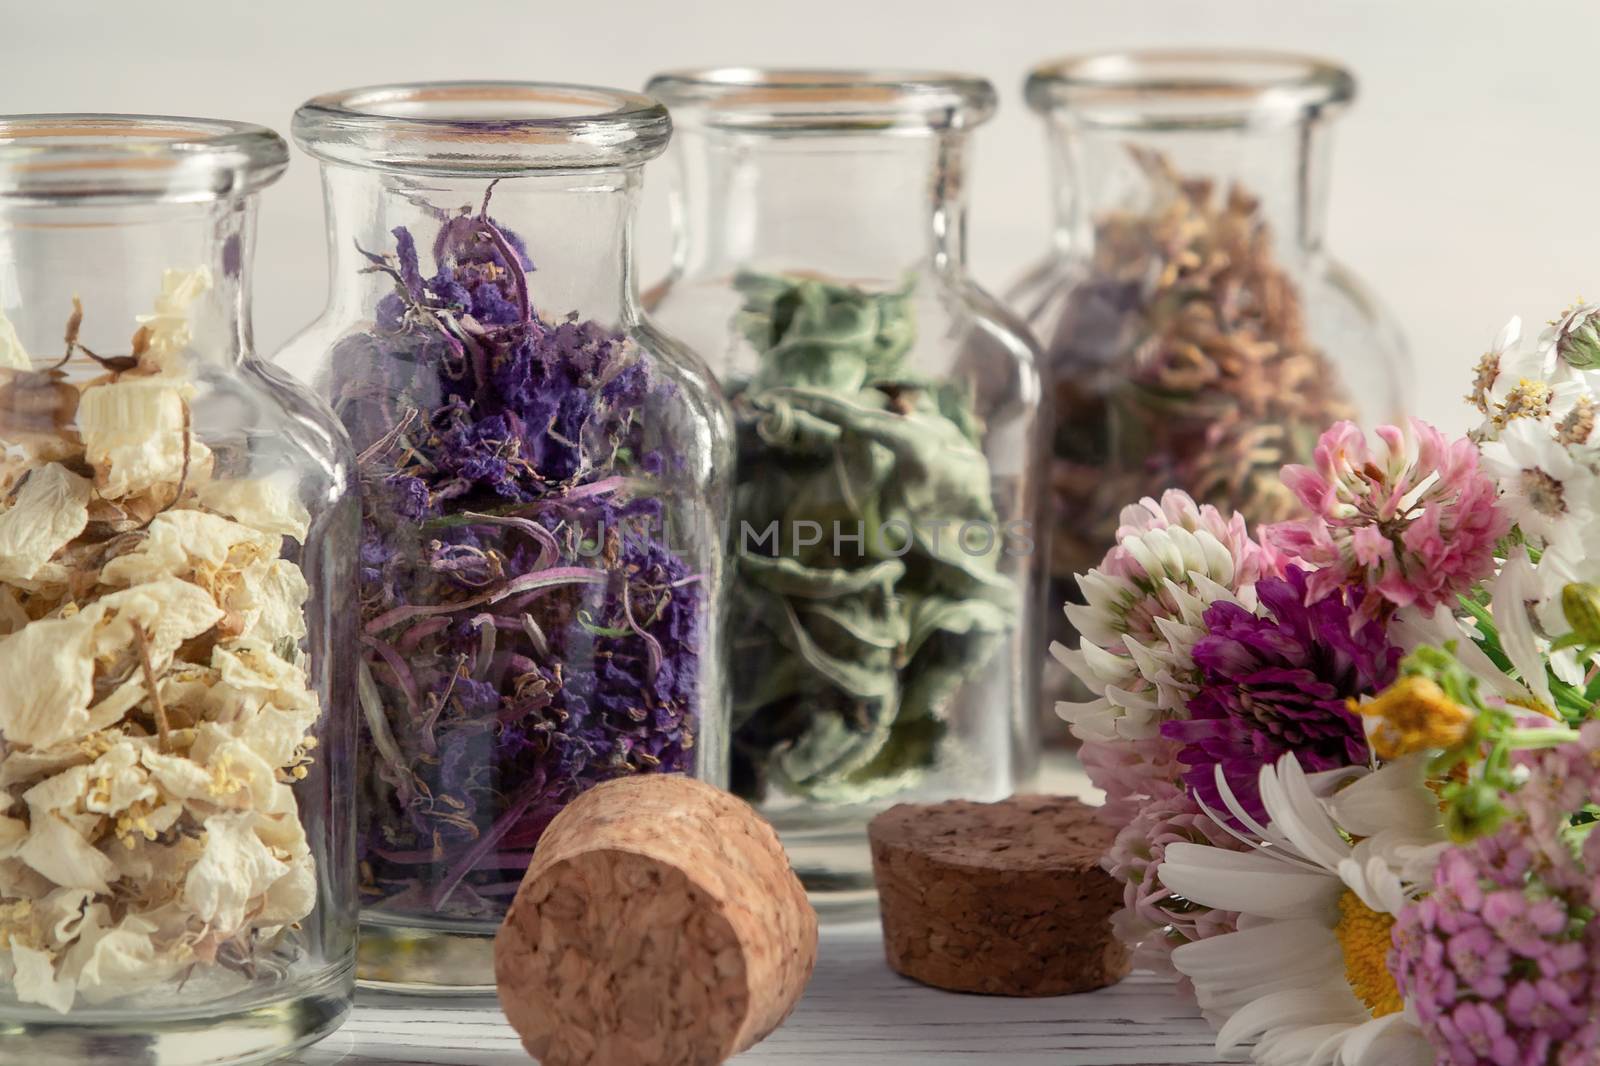 Drying and harvesting of medicinal herbs, homeopathy and alternative medicine concept.